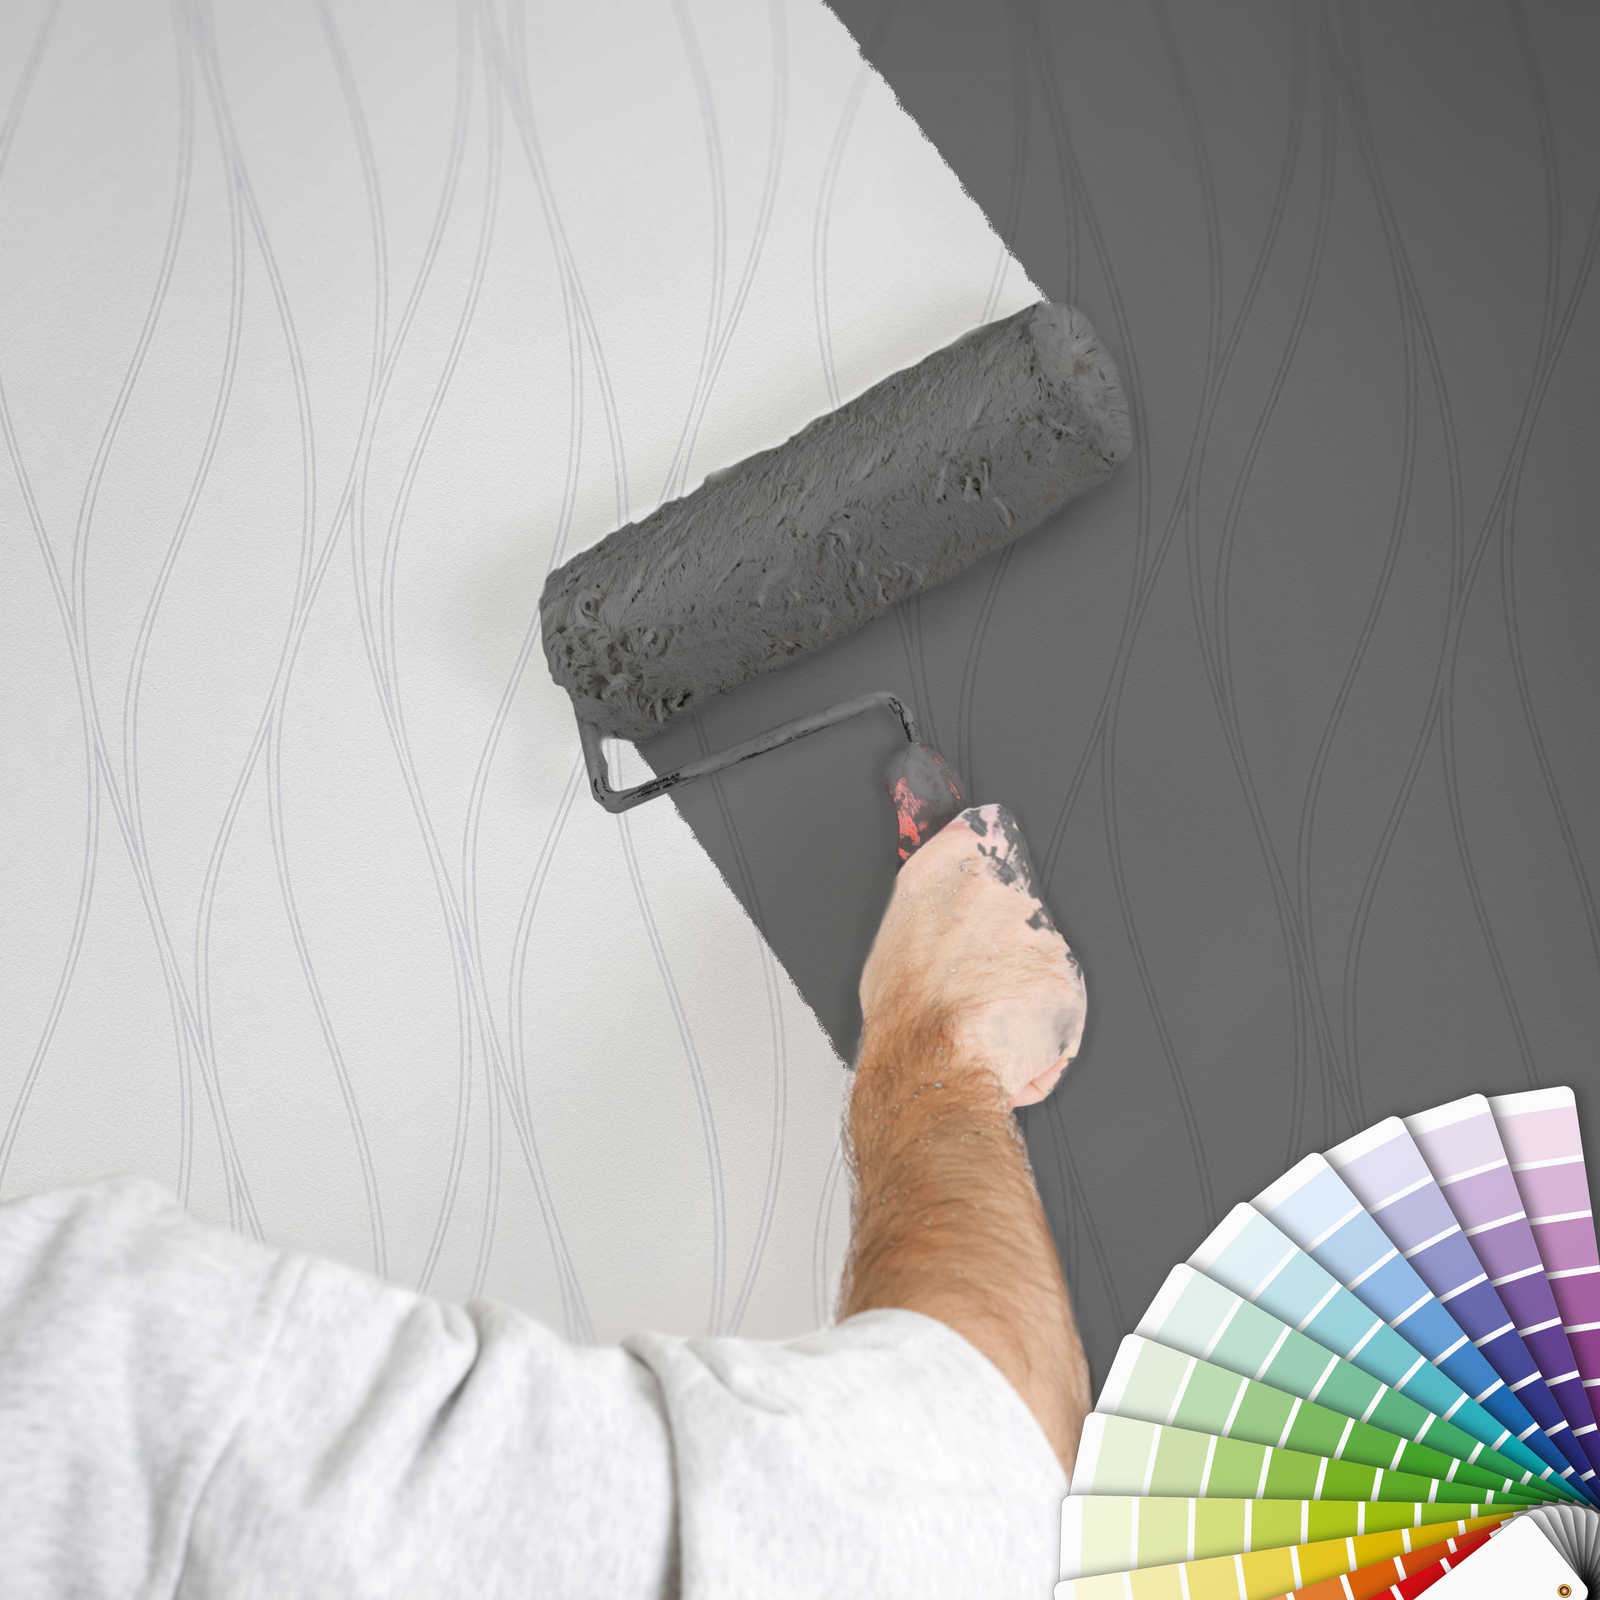             Non-woven wallpaper light grey with wavy lines patterns
        